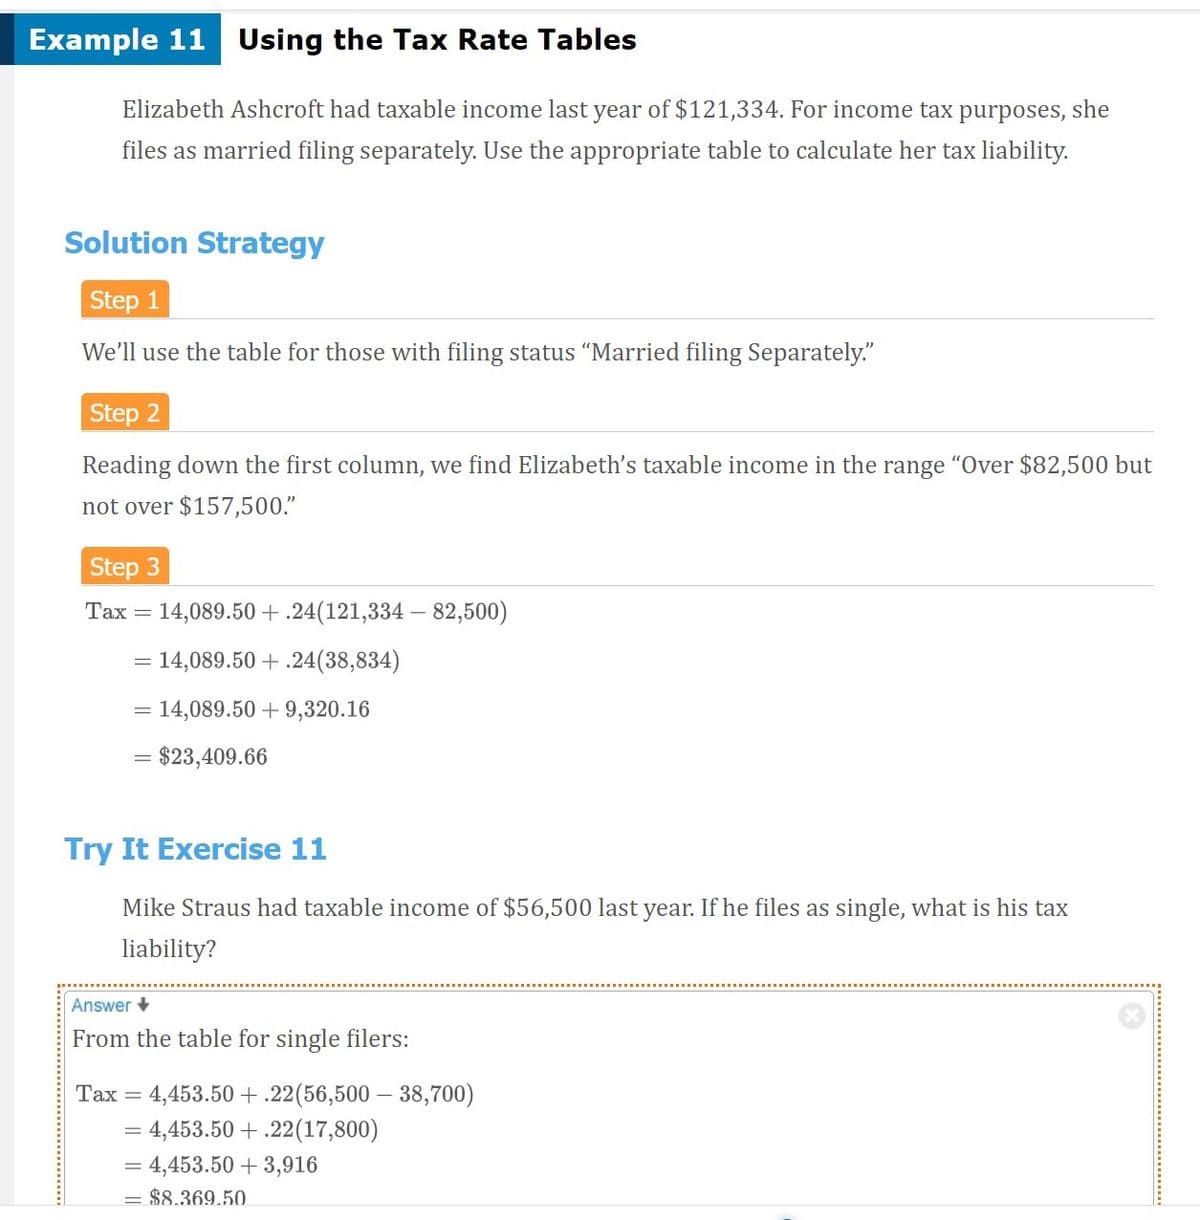 Example 11 Using the Tax Rate Tables
Elizabeth Ashcroft had taxable income last year of $121,334. For income tax purposes, she
files as married filing separately. Use the appropriate table to calculate her tax liability.
Solution Strategy
Step 1
We'll use the table for those with filing status “Married filing Separately."
Step 2
Reading down the first column, we find Elizabeth's taxable income in the range "Over $82,500 but
not over $157,500."
Step 3
Tax = 14,089.50+.24(121,334 – 82,500)
= 14,089.50 + .24(38,834)
= 14,089.50 + 9,320.16
= $23,409.66
Try It Exercise 11
Mike Straus had taxable income of $56,500 last year. If he files as single, what is his tax
liability?
Answer +
From the table for single filers:
4,453.50 + .22(56,500 – 38,700)
= 4,453.50 + .22(17,800)
Таx
= 4,453.50 + 3,916
= $8.369.50.
